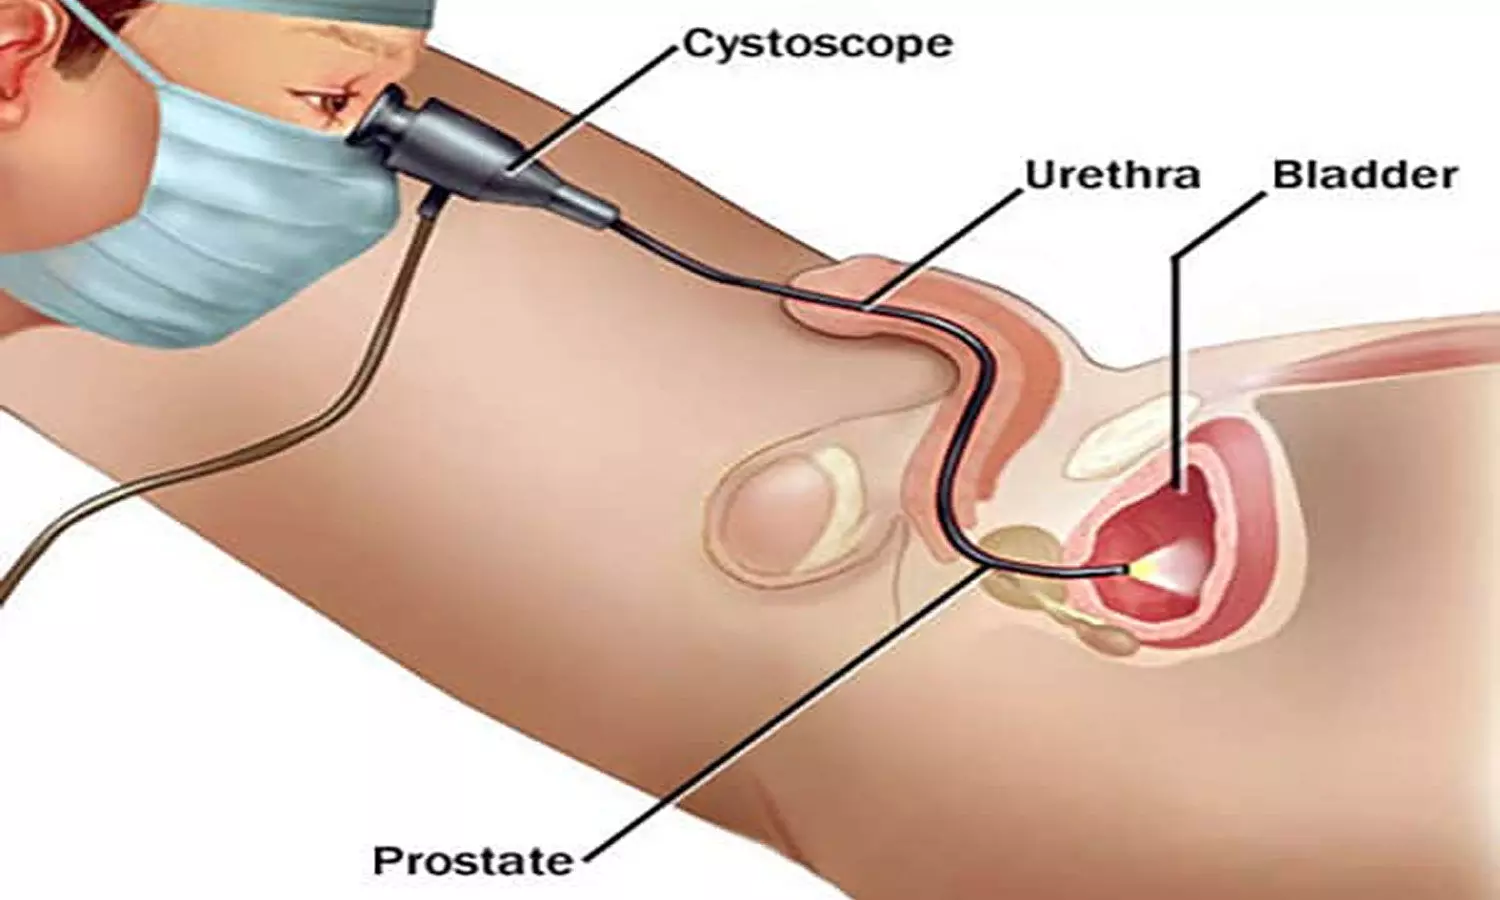 Is it useful to perform biopsy at flexible cystoscopy? Study throws light